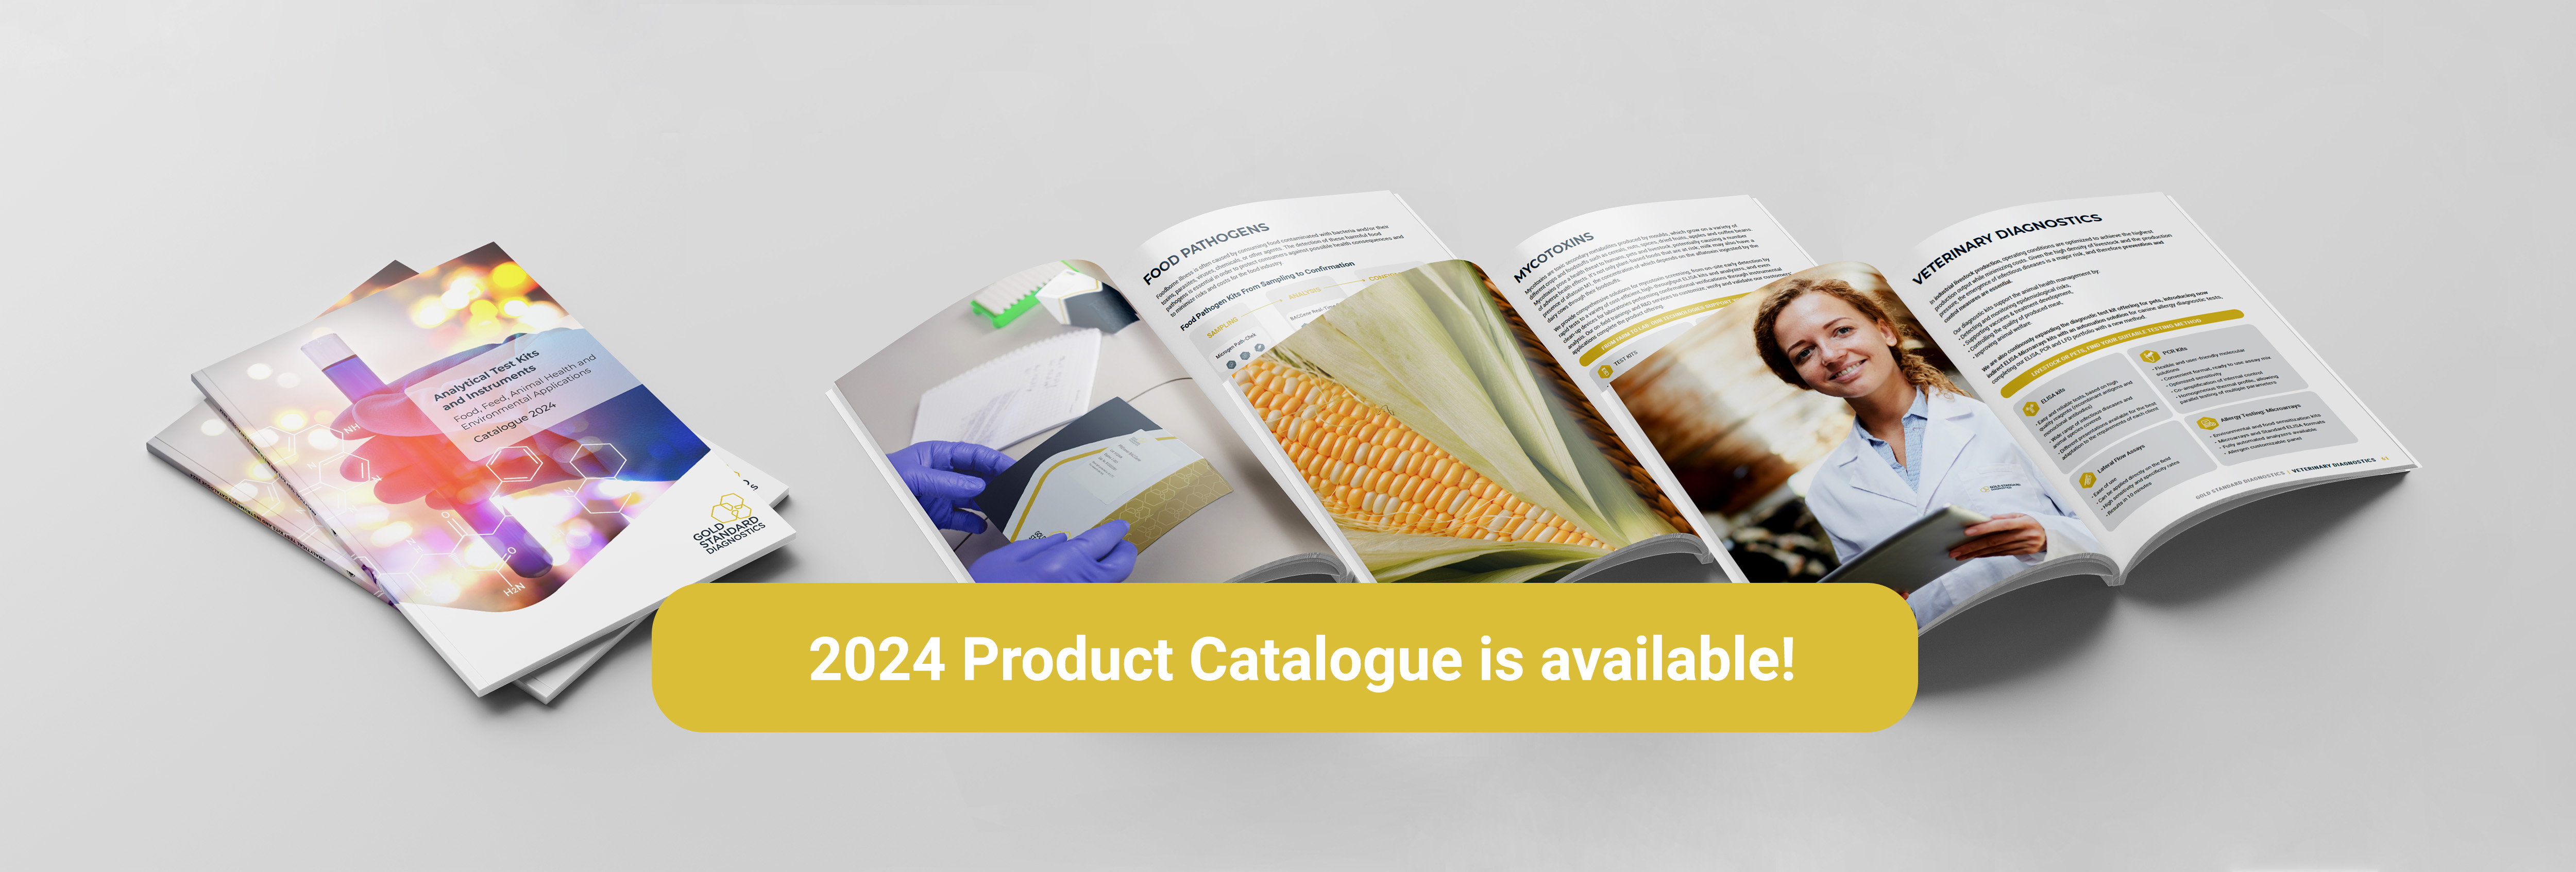 2024 Product Catalogue is now available!